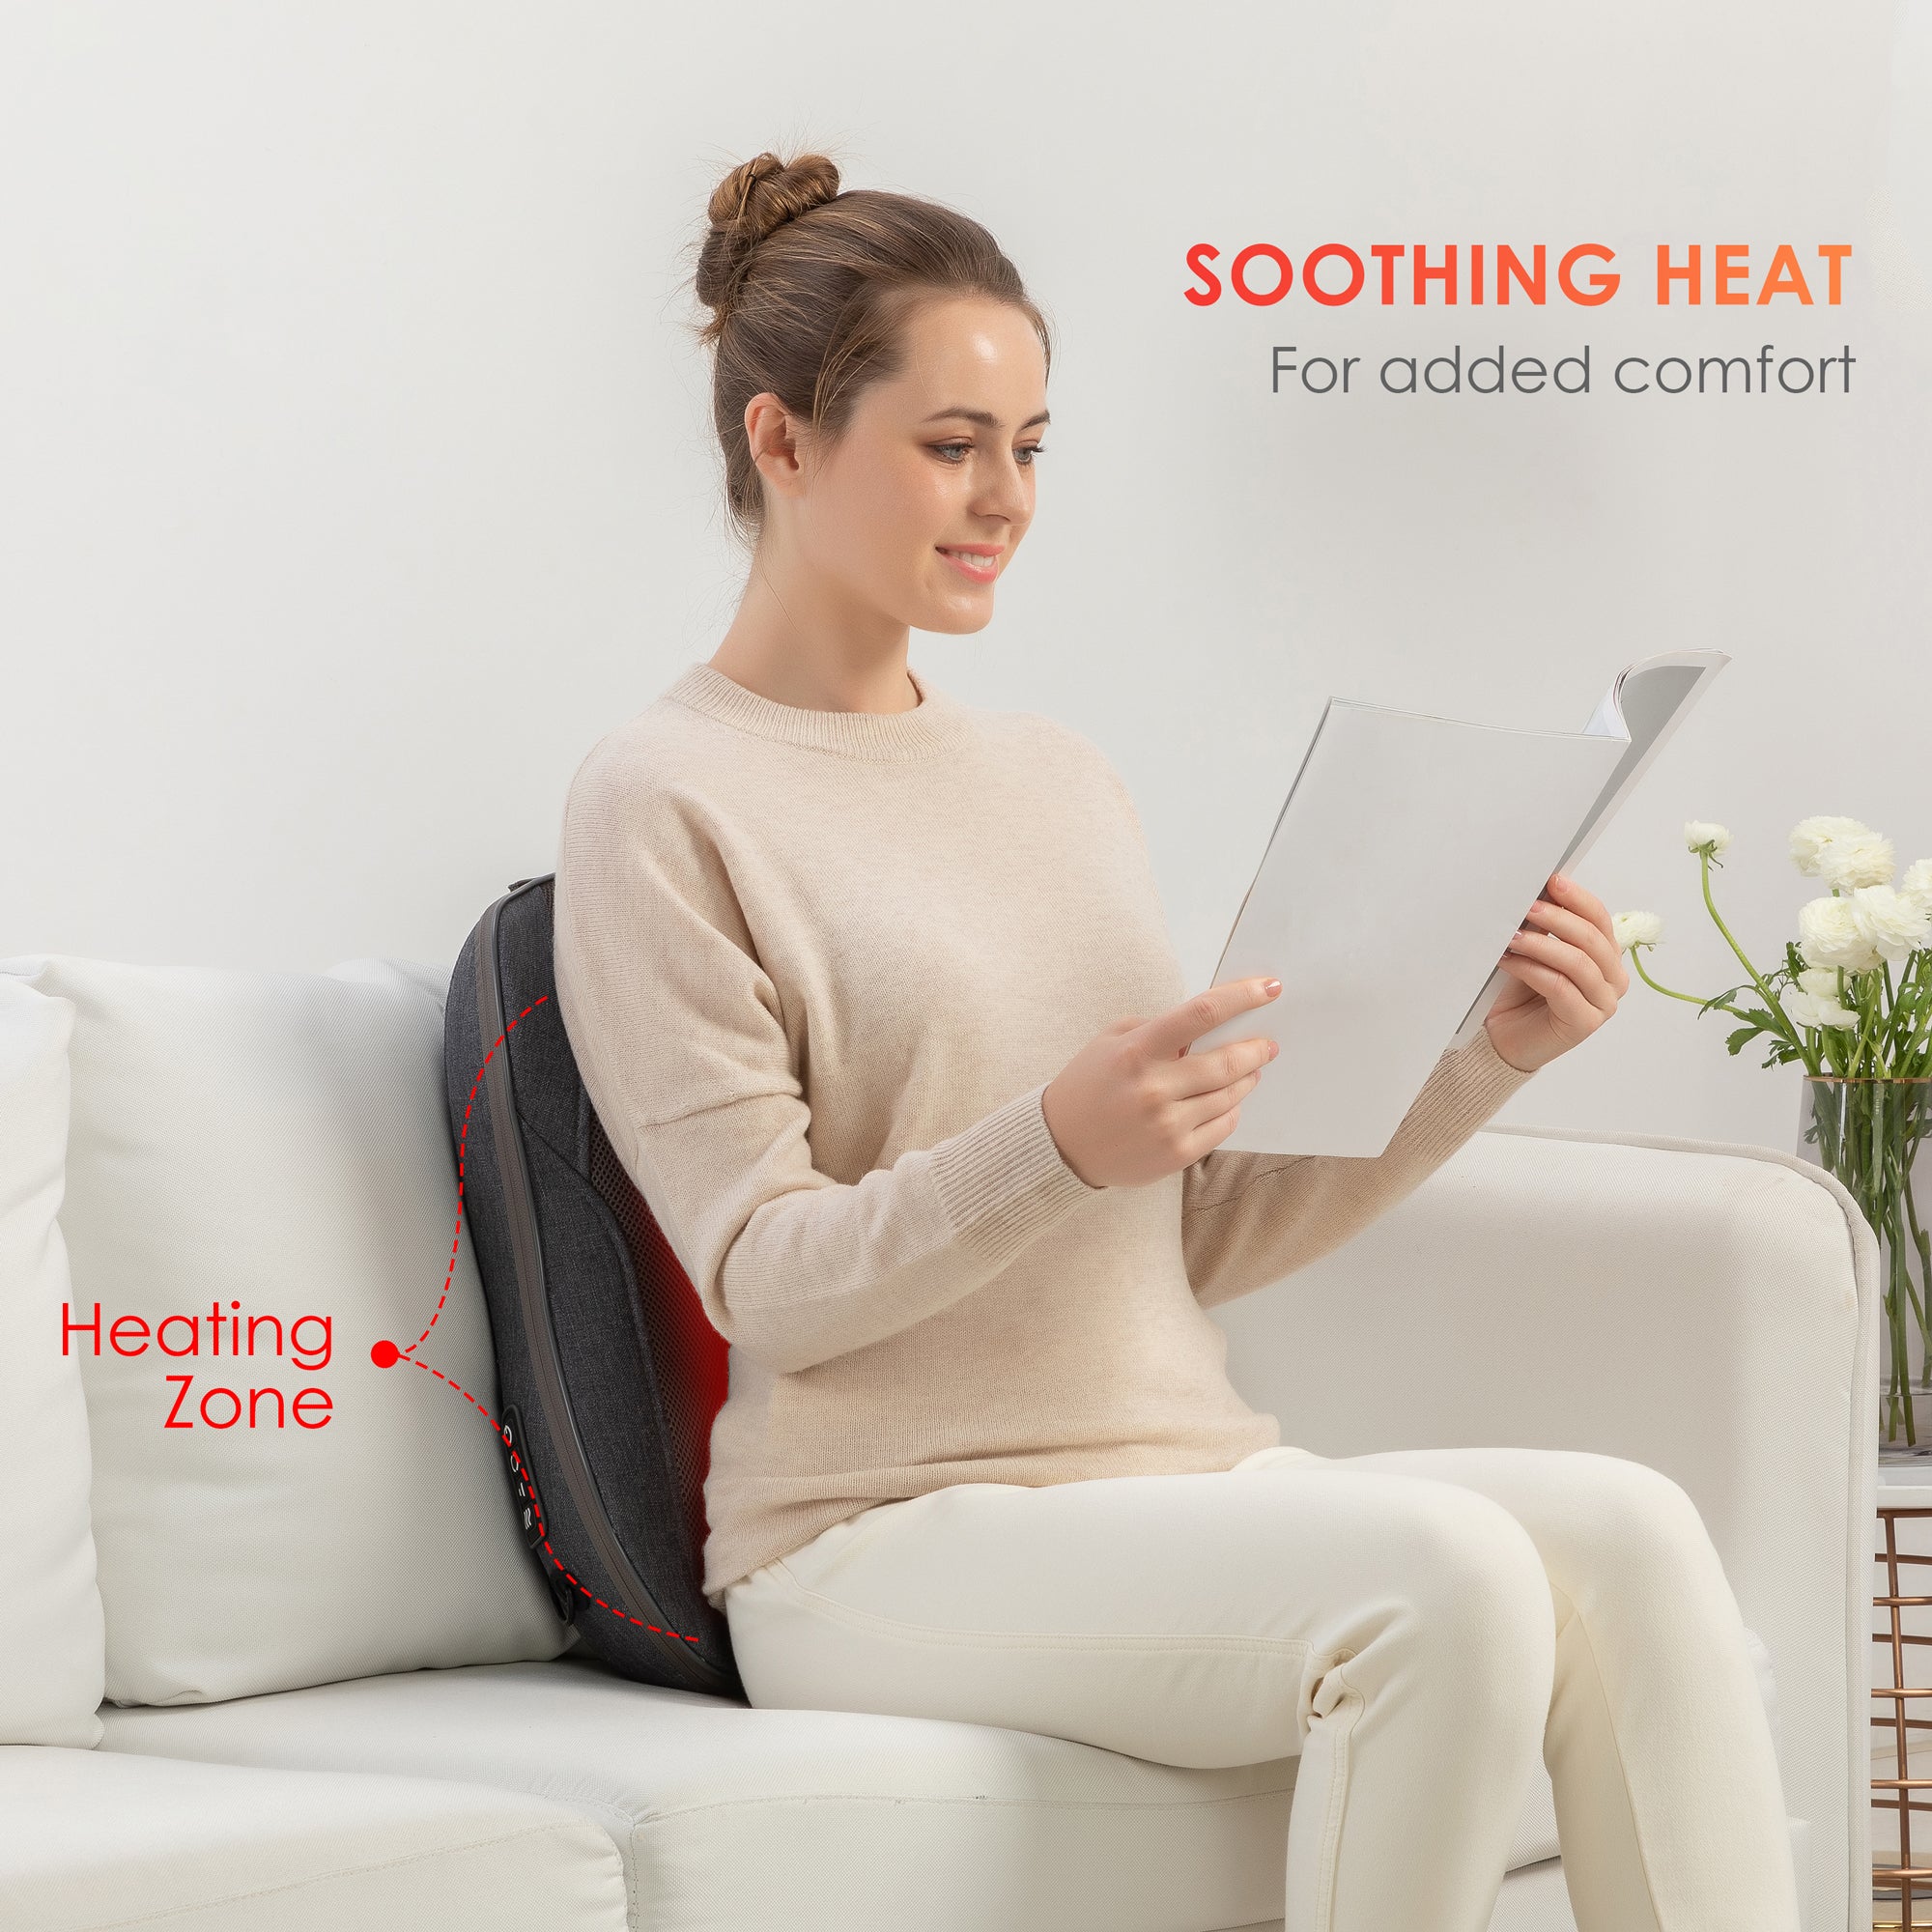 comrelax Back Massage Chair Pad, Deep Tissue Vibration Seat Massage  Cushion, 2 Levels Cooling or Hea…See more comrelax Back Massage Chair Pad,  Deep